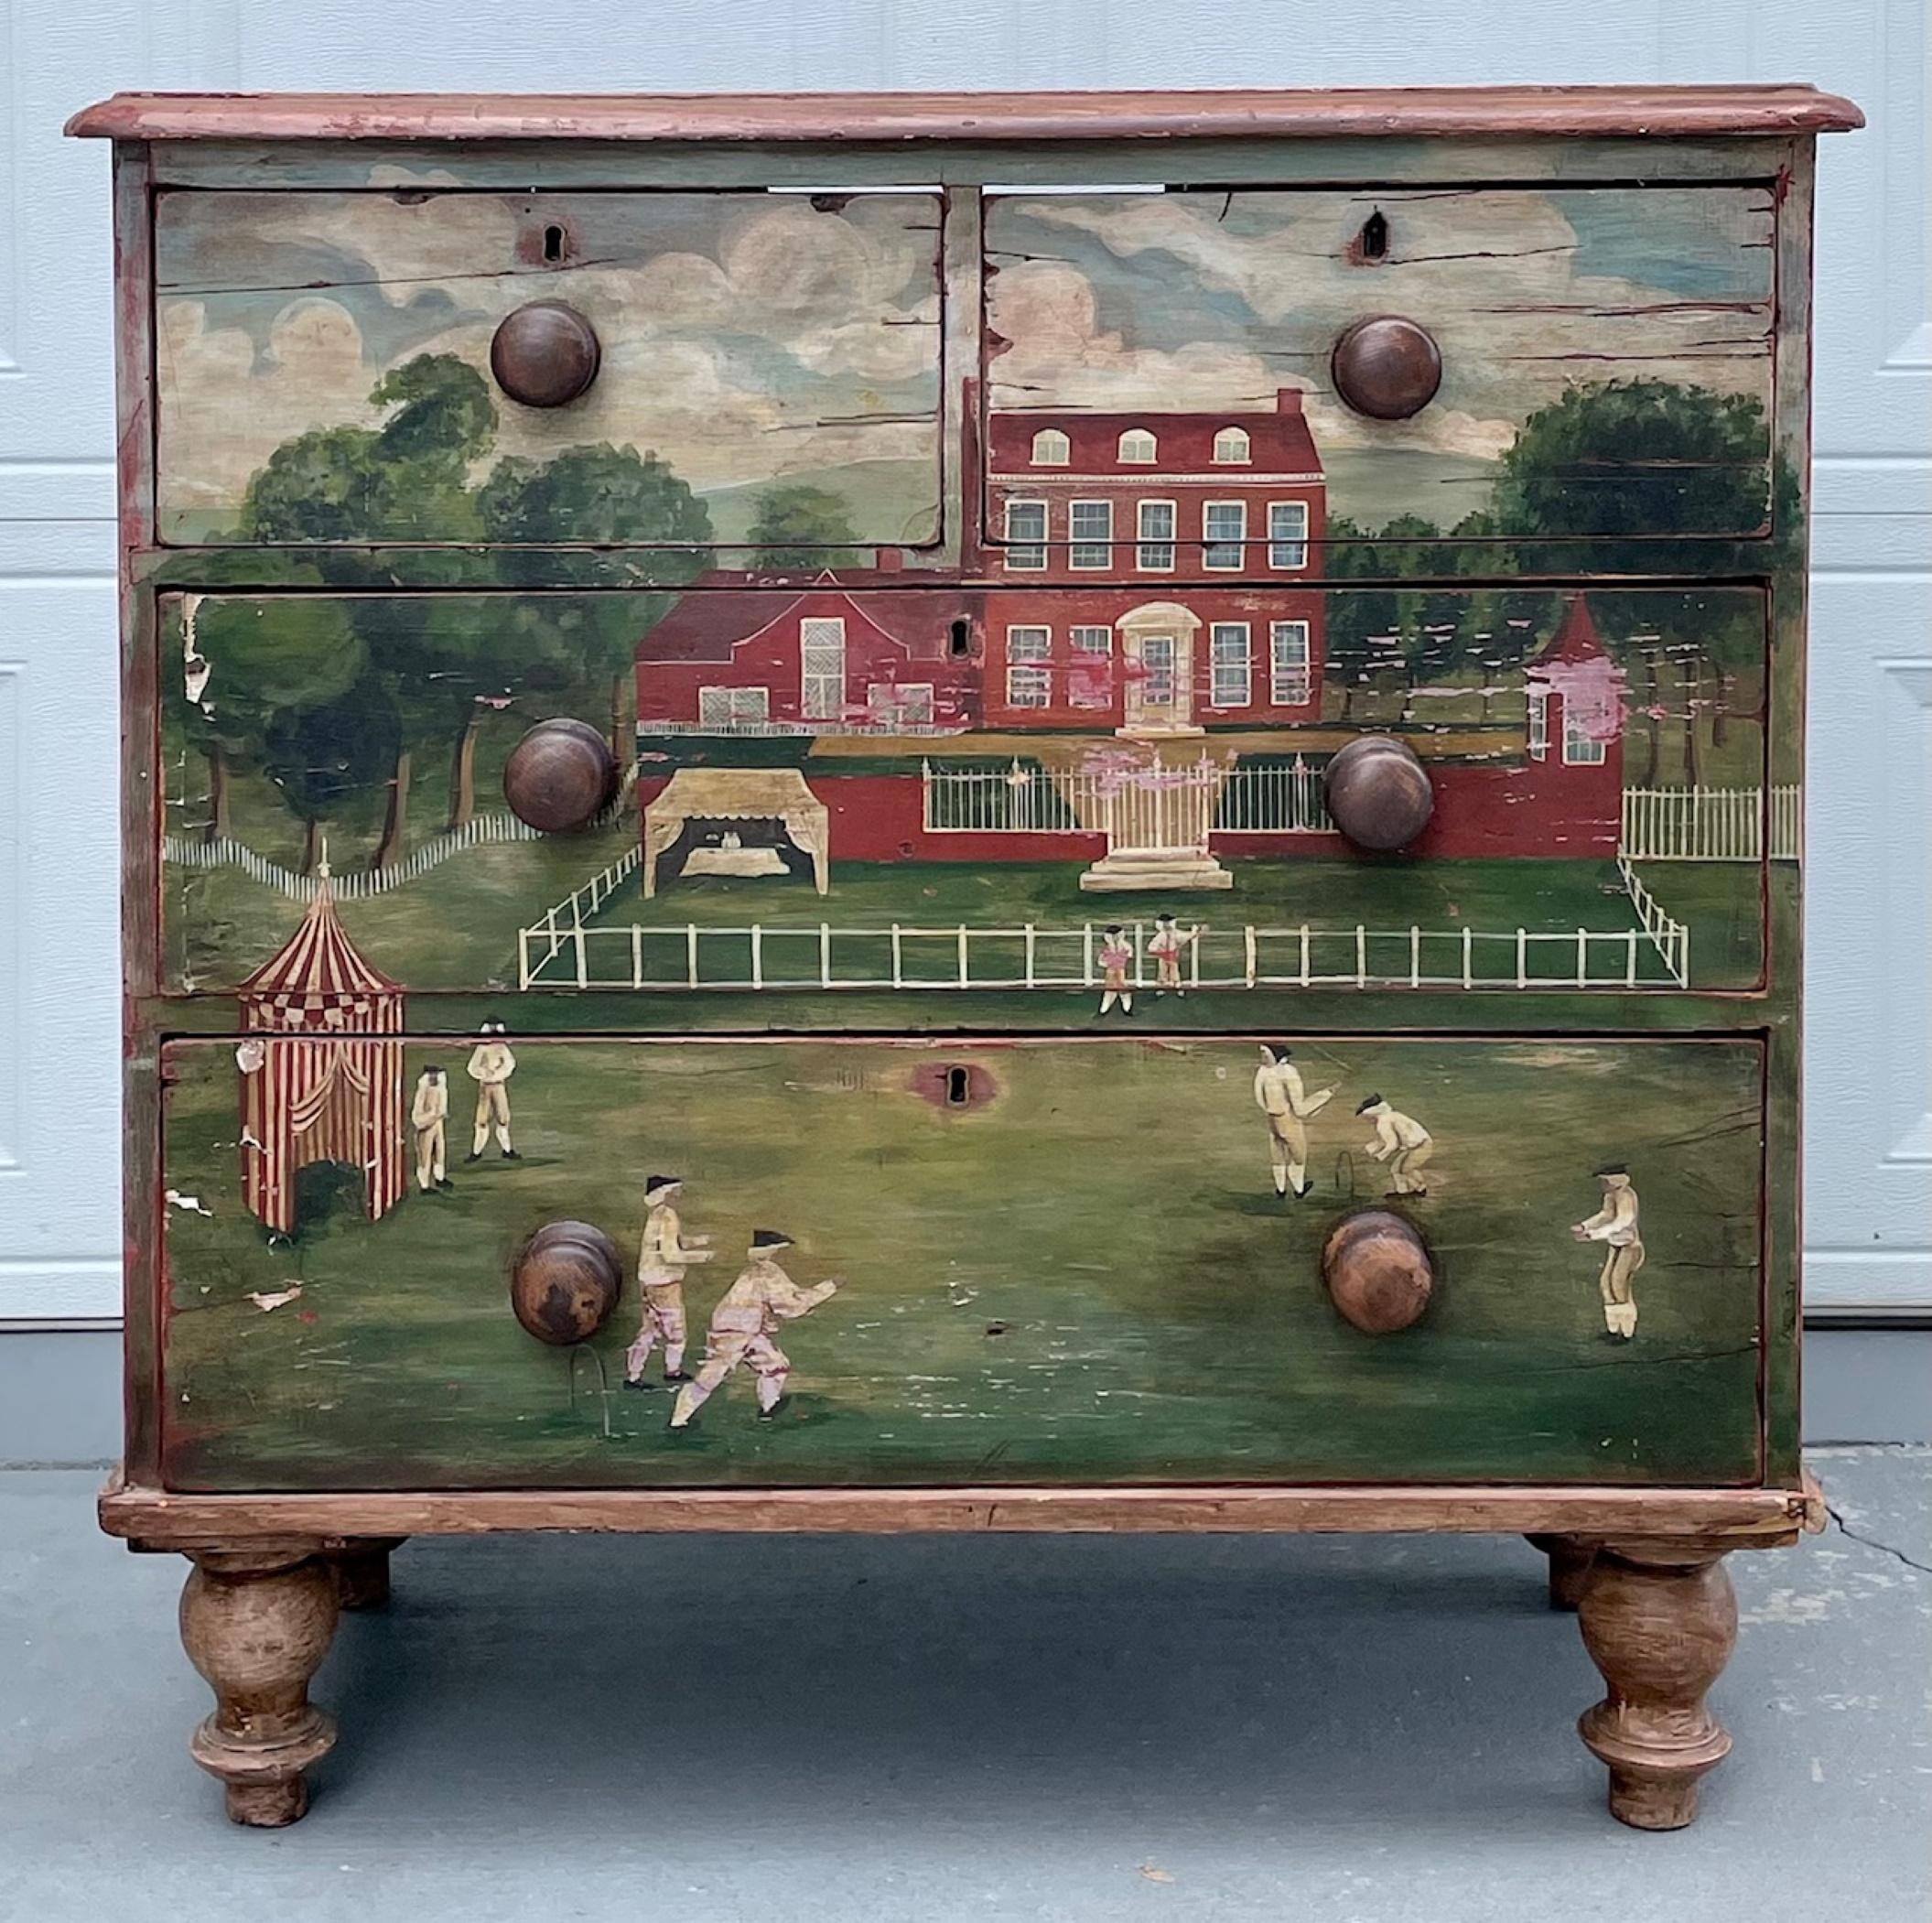 19th century Colonial American chest of drawers, paint decorated Americana

Charming chest of drawers in white pine. The front is decorated with an original Folk Art painting. It is executed with gesso and paint on the wood surface. The painting,